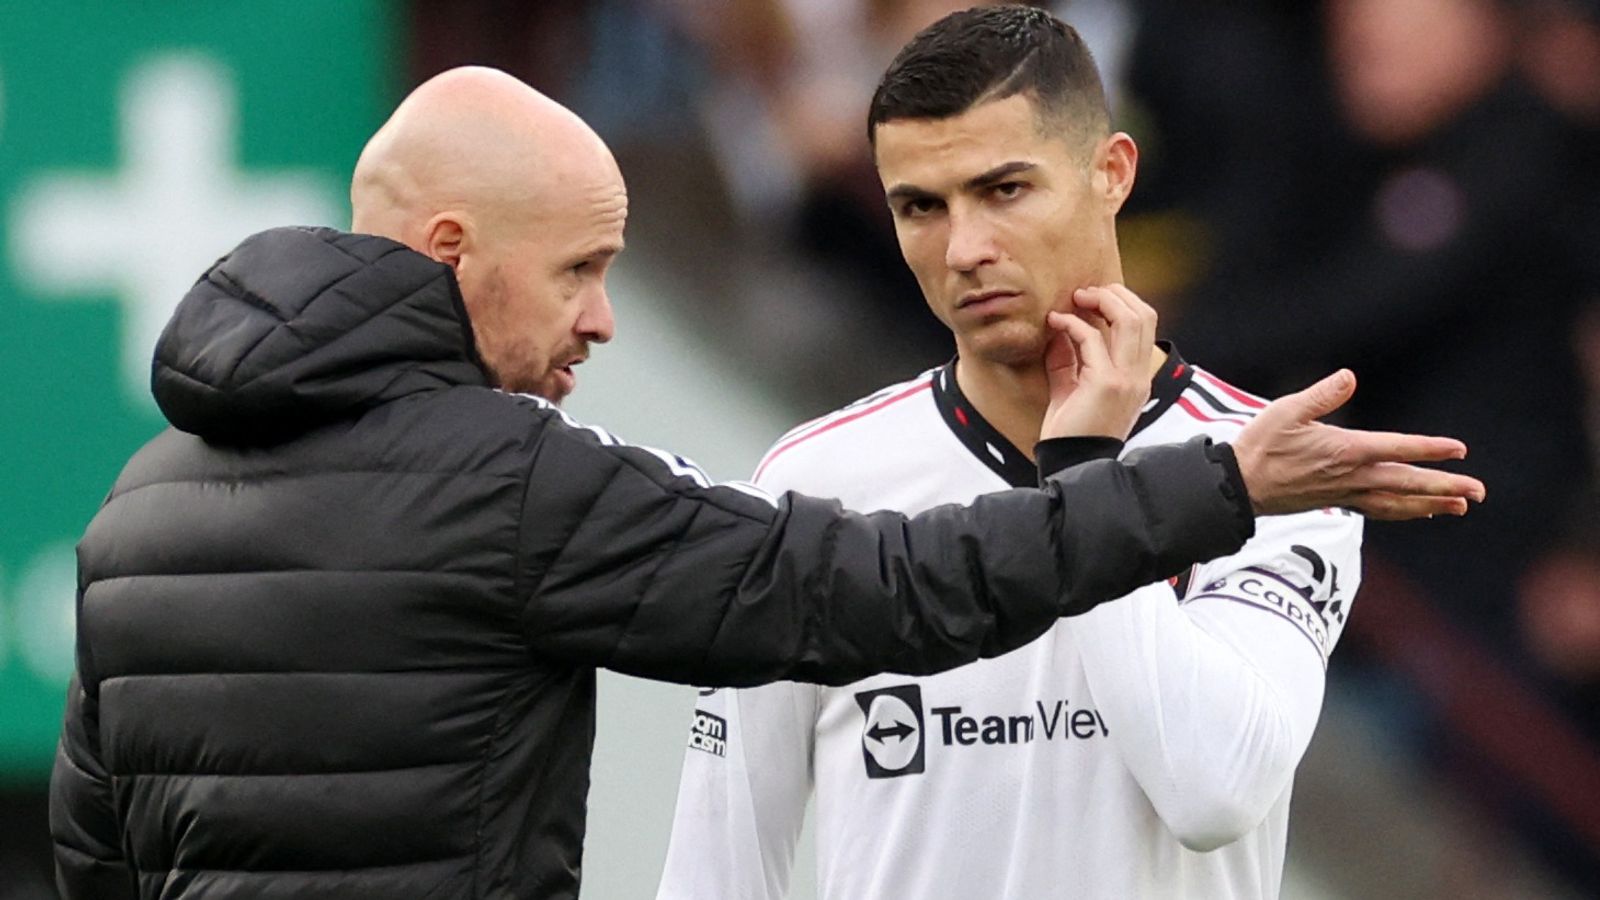 Cristiano Ronaldo says he feels 'betrayed' by Manchester United and has 'no respect' for Erik ten Hag 